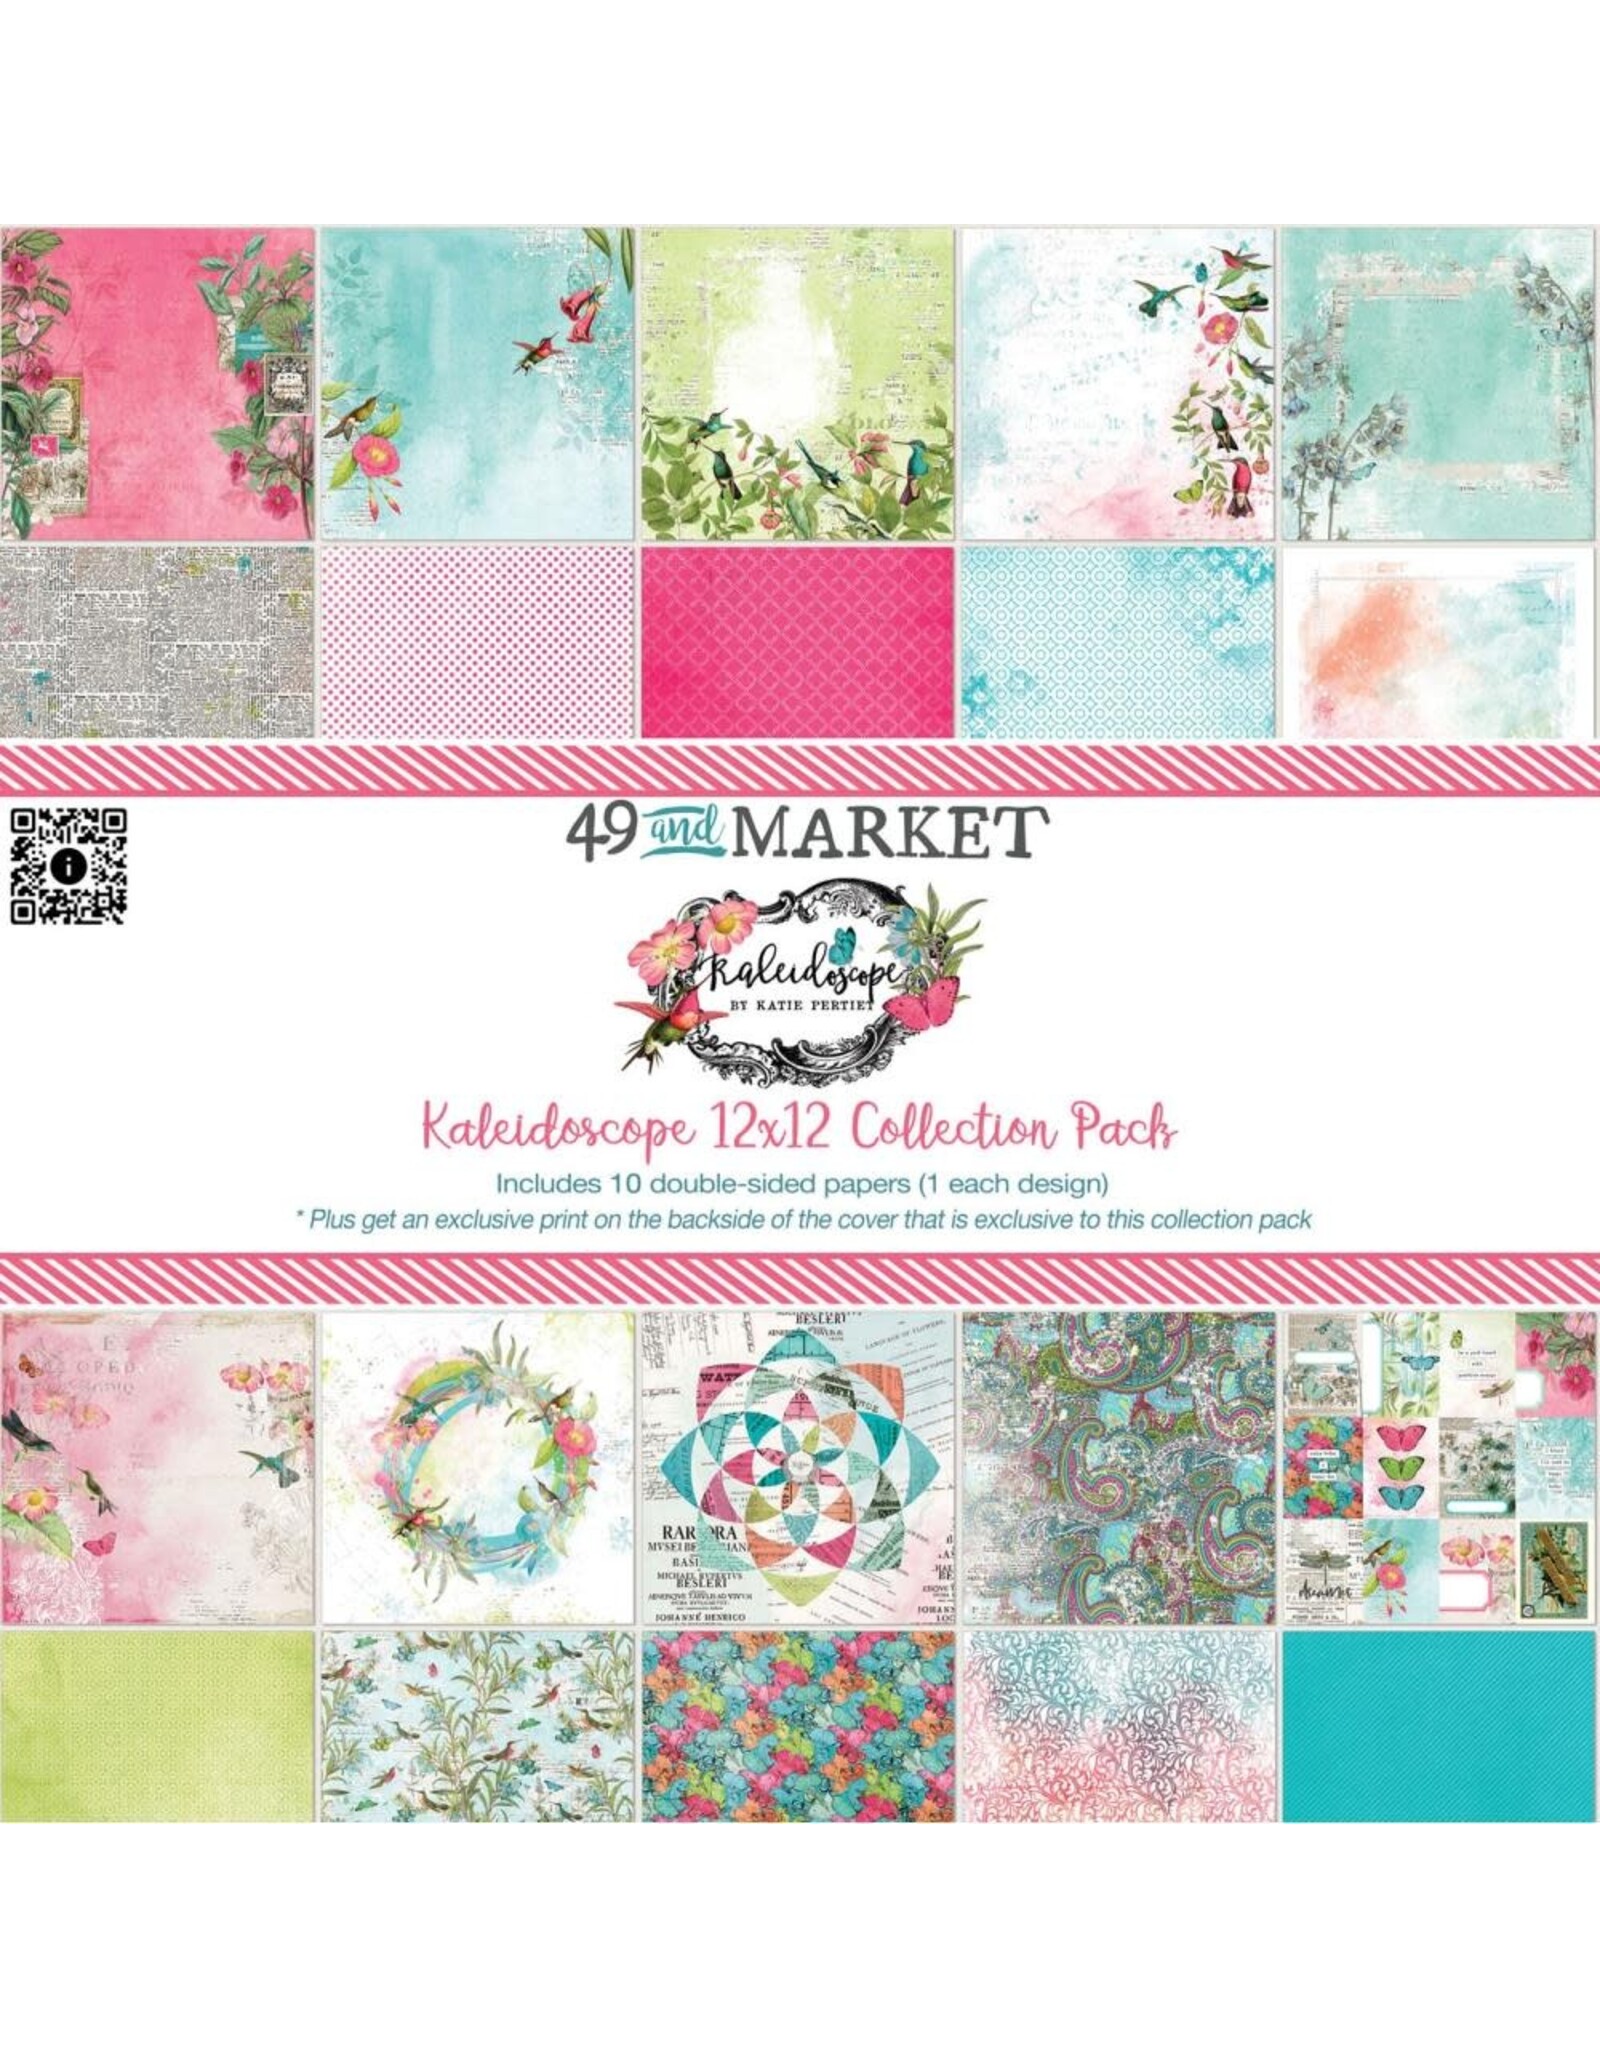 49 AND MARKET 49 AND MARKET KALEIDOSCOPE 12x12 COLLECTION PACK